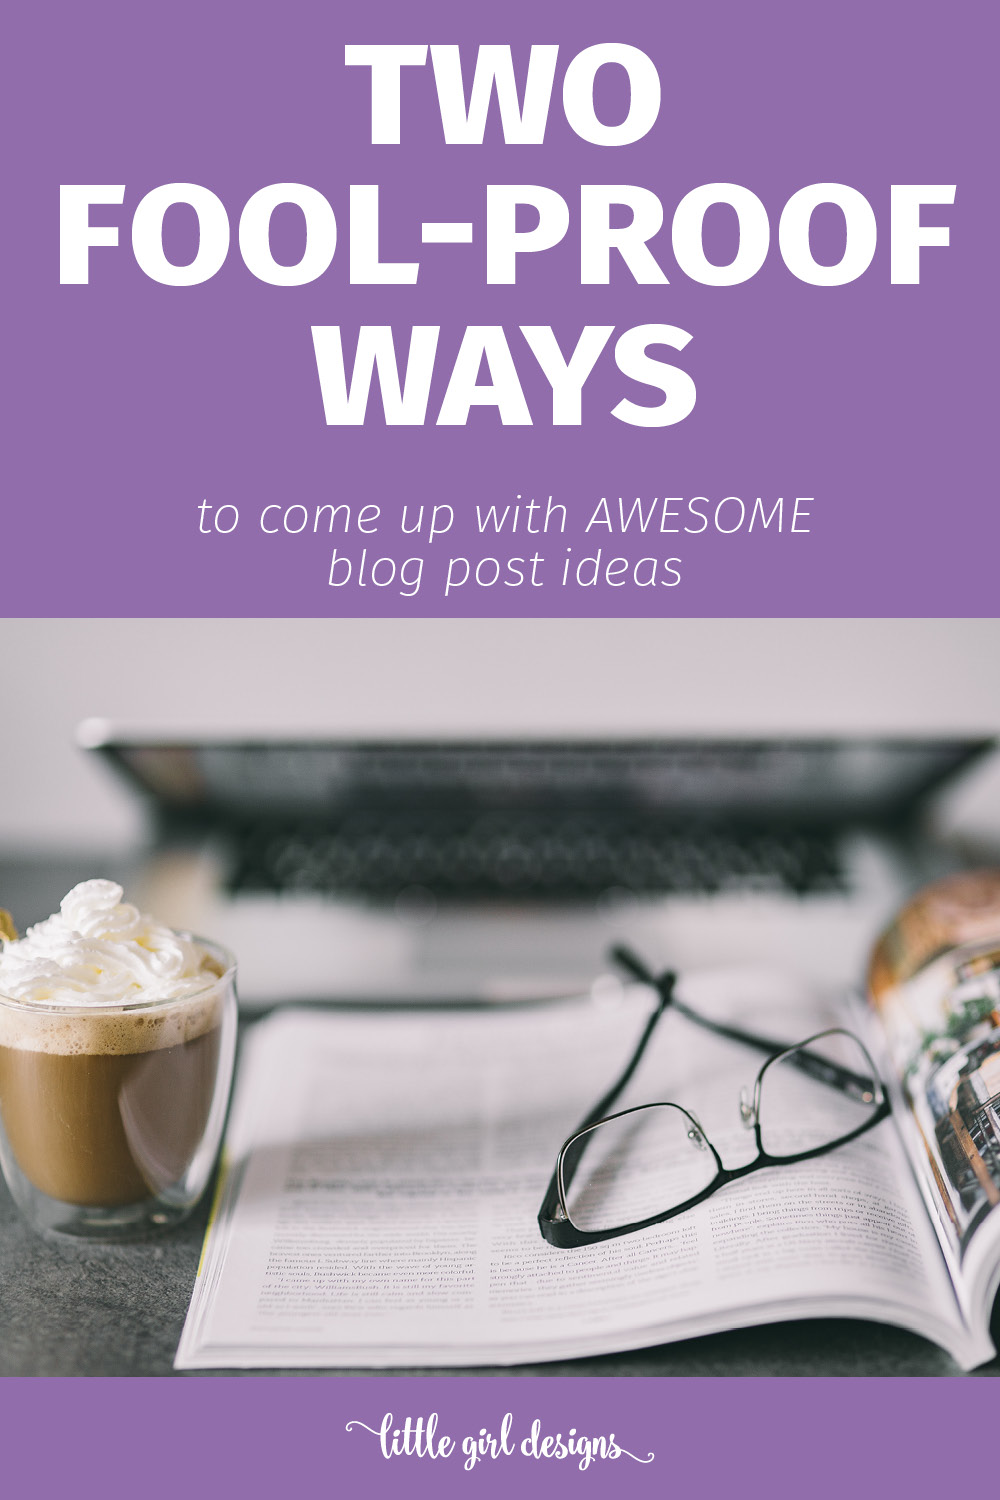 Why didn't I think of this? I tried these and came up with over 50 blog post ideas within 20 minutes. Whoohoo!